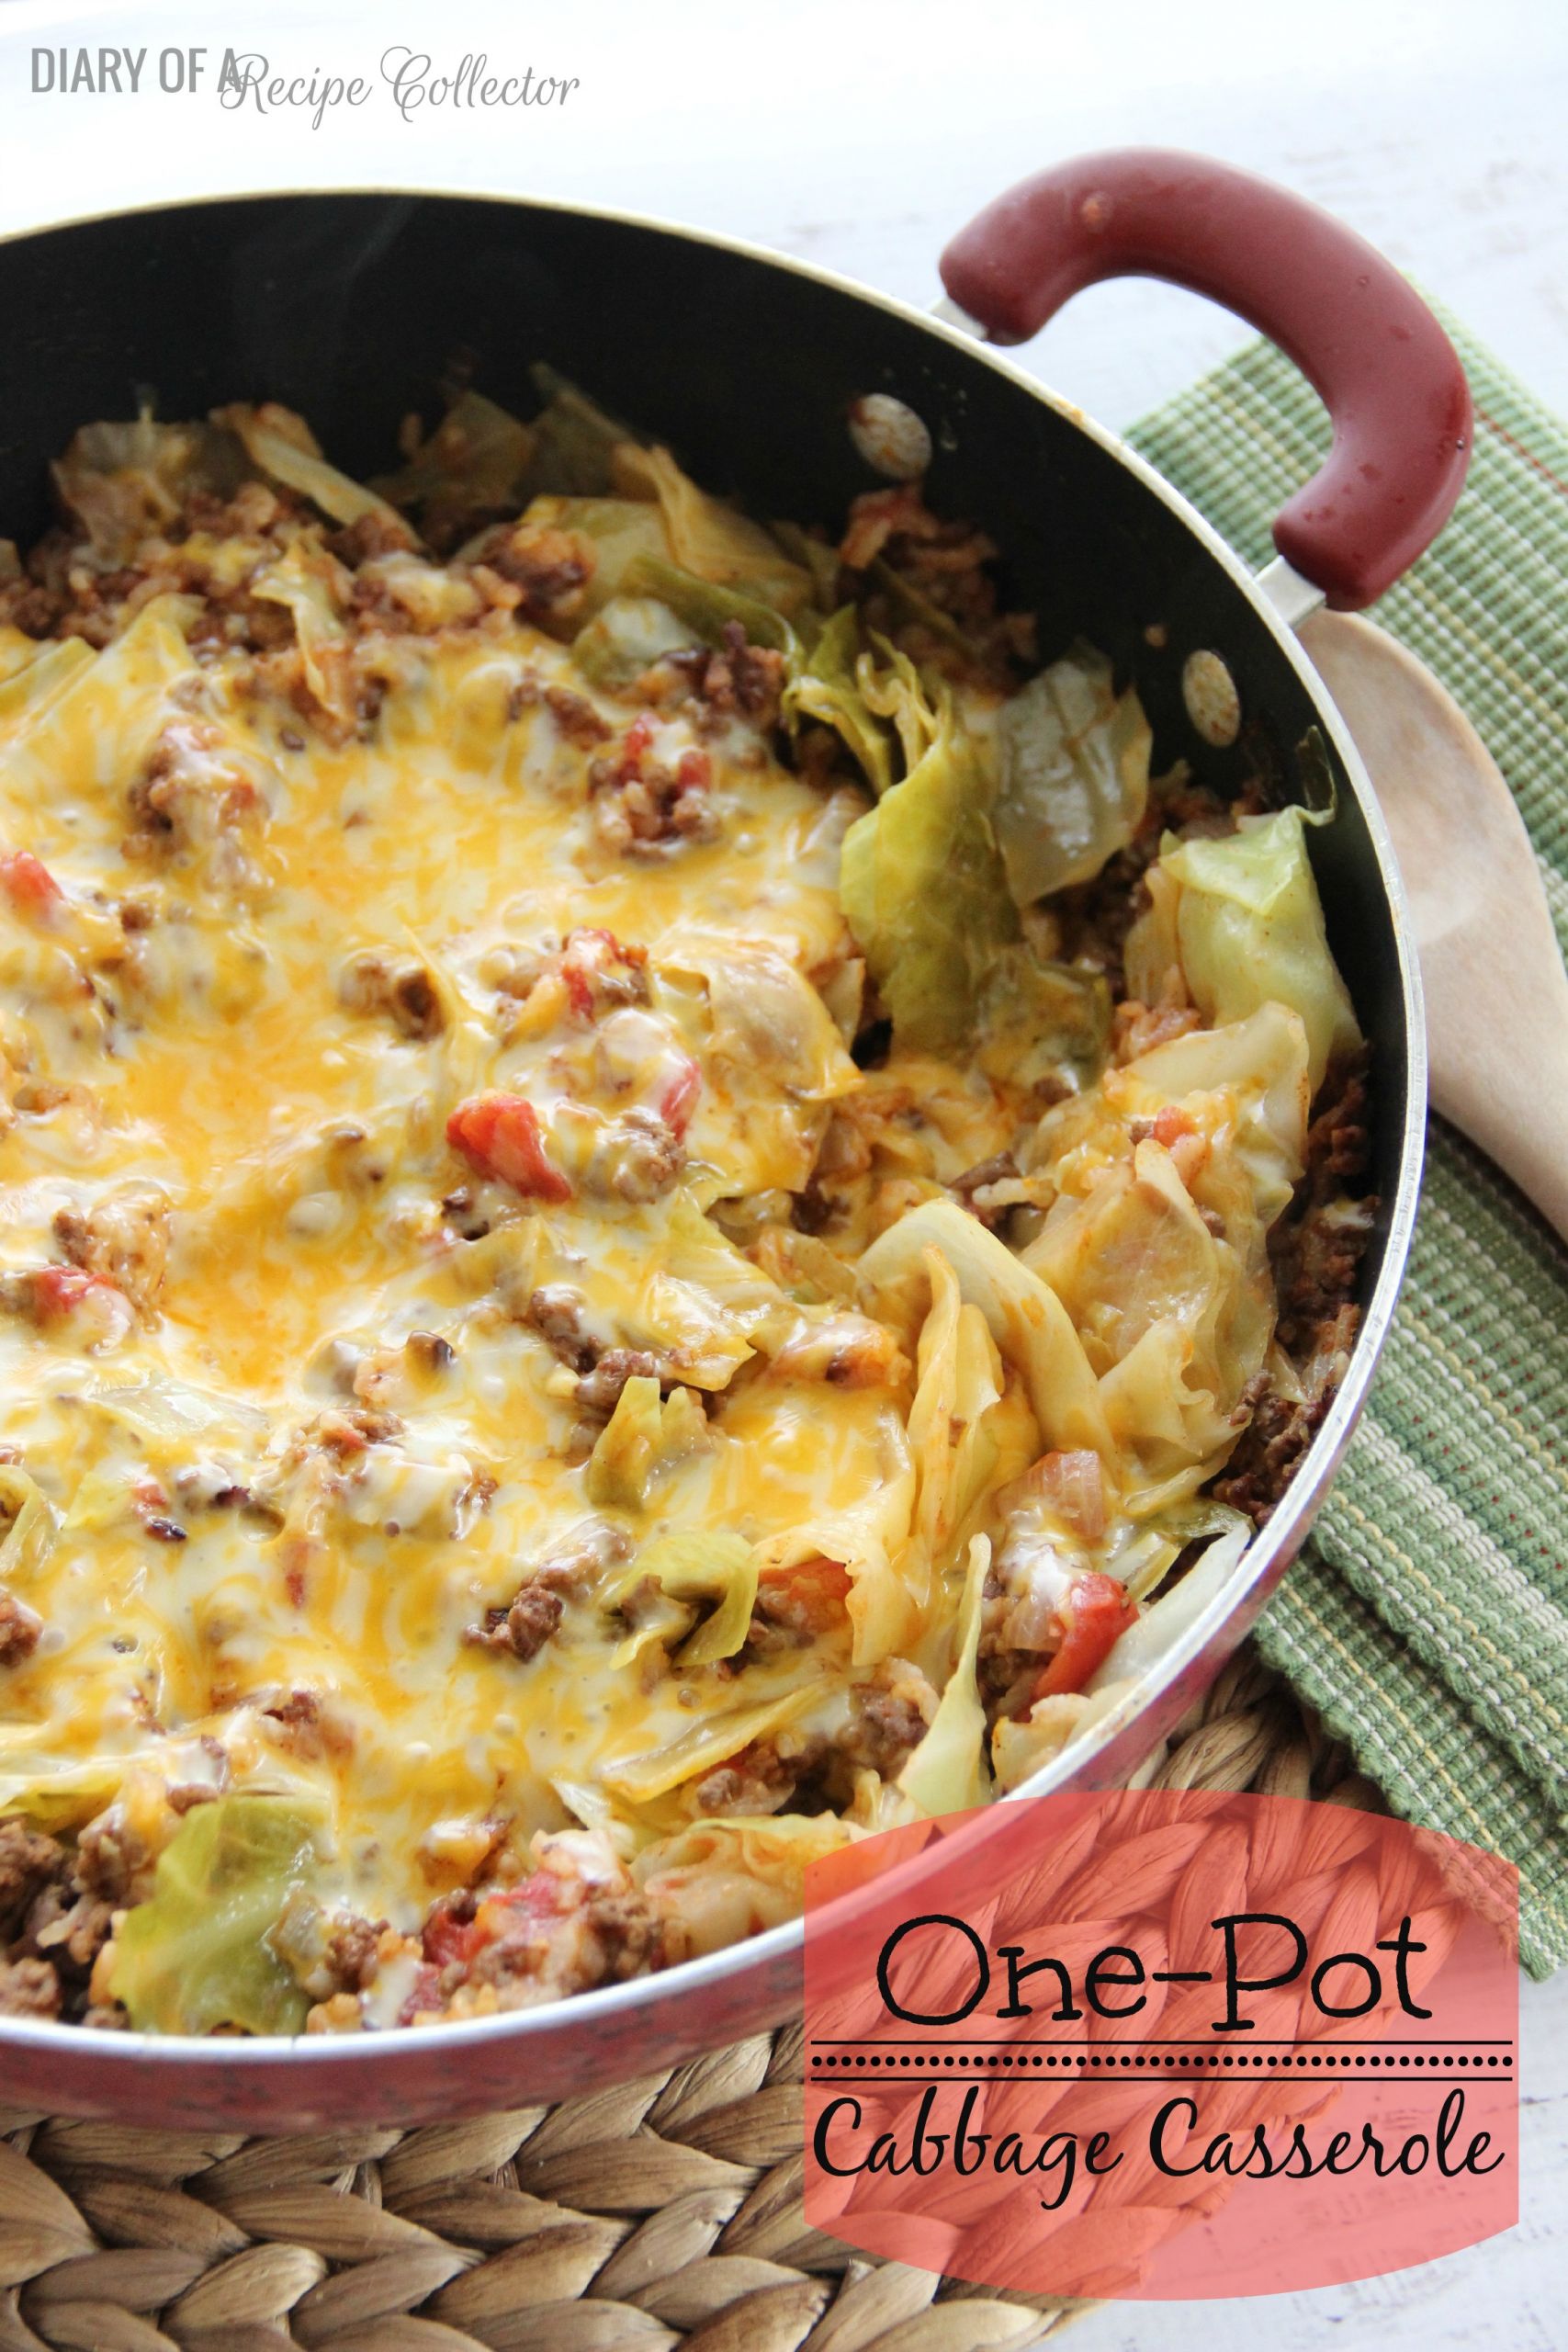 One Pot Cabbage Casserole Awesome E Pot Cabbage Casserole Diary Of A Recipe Collector